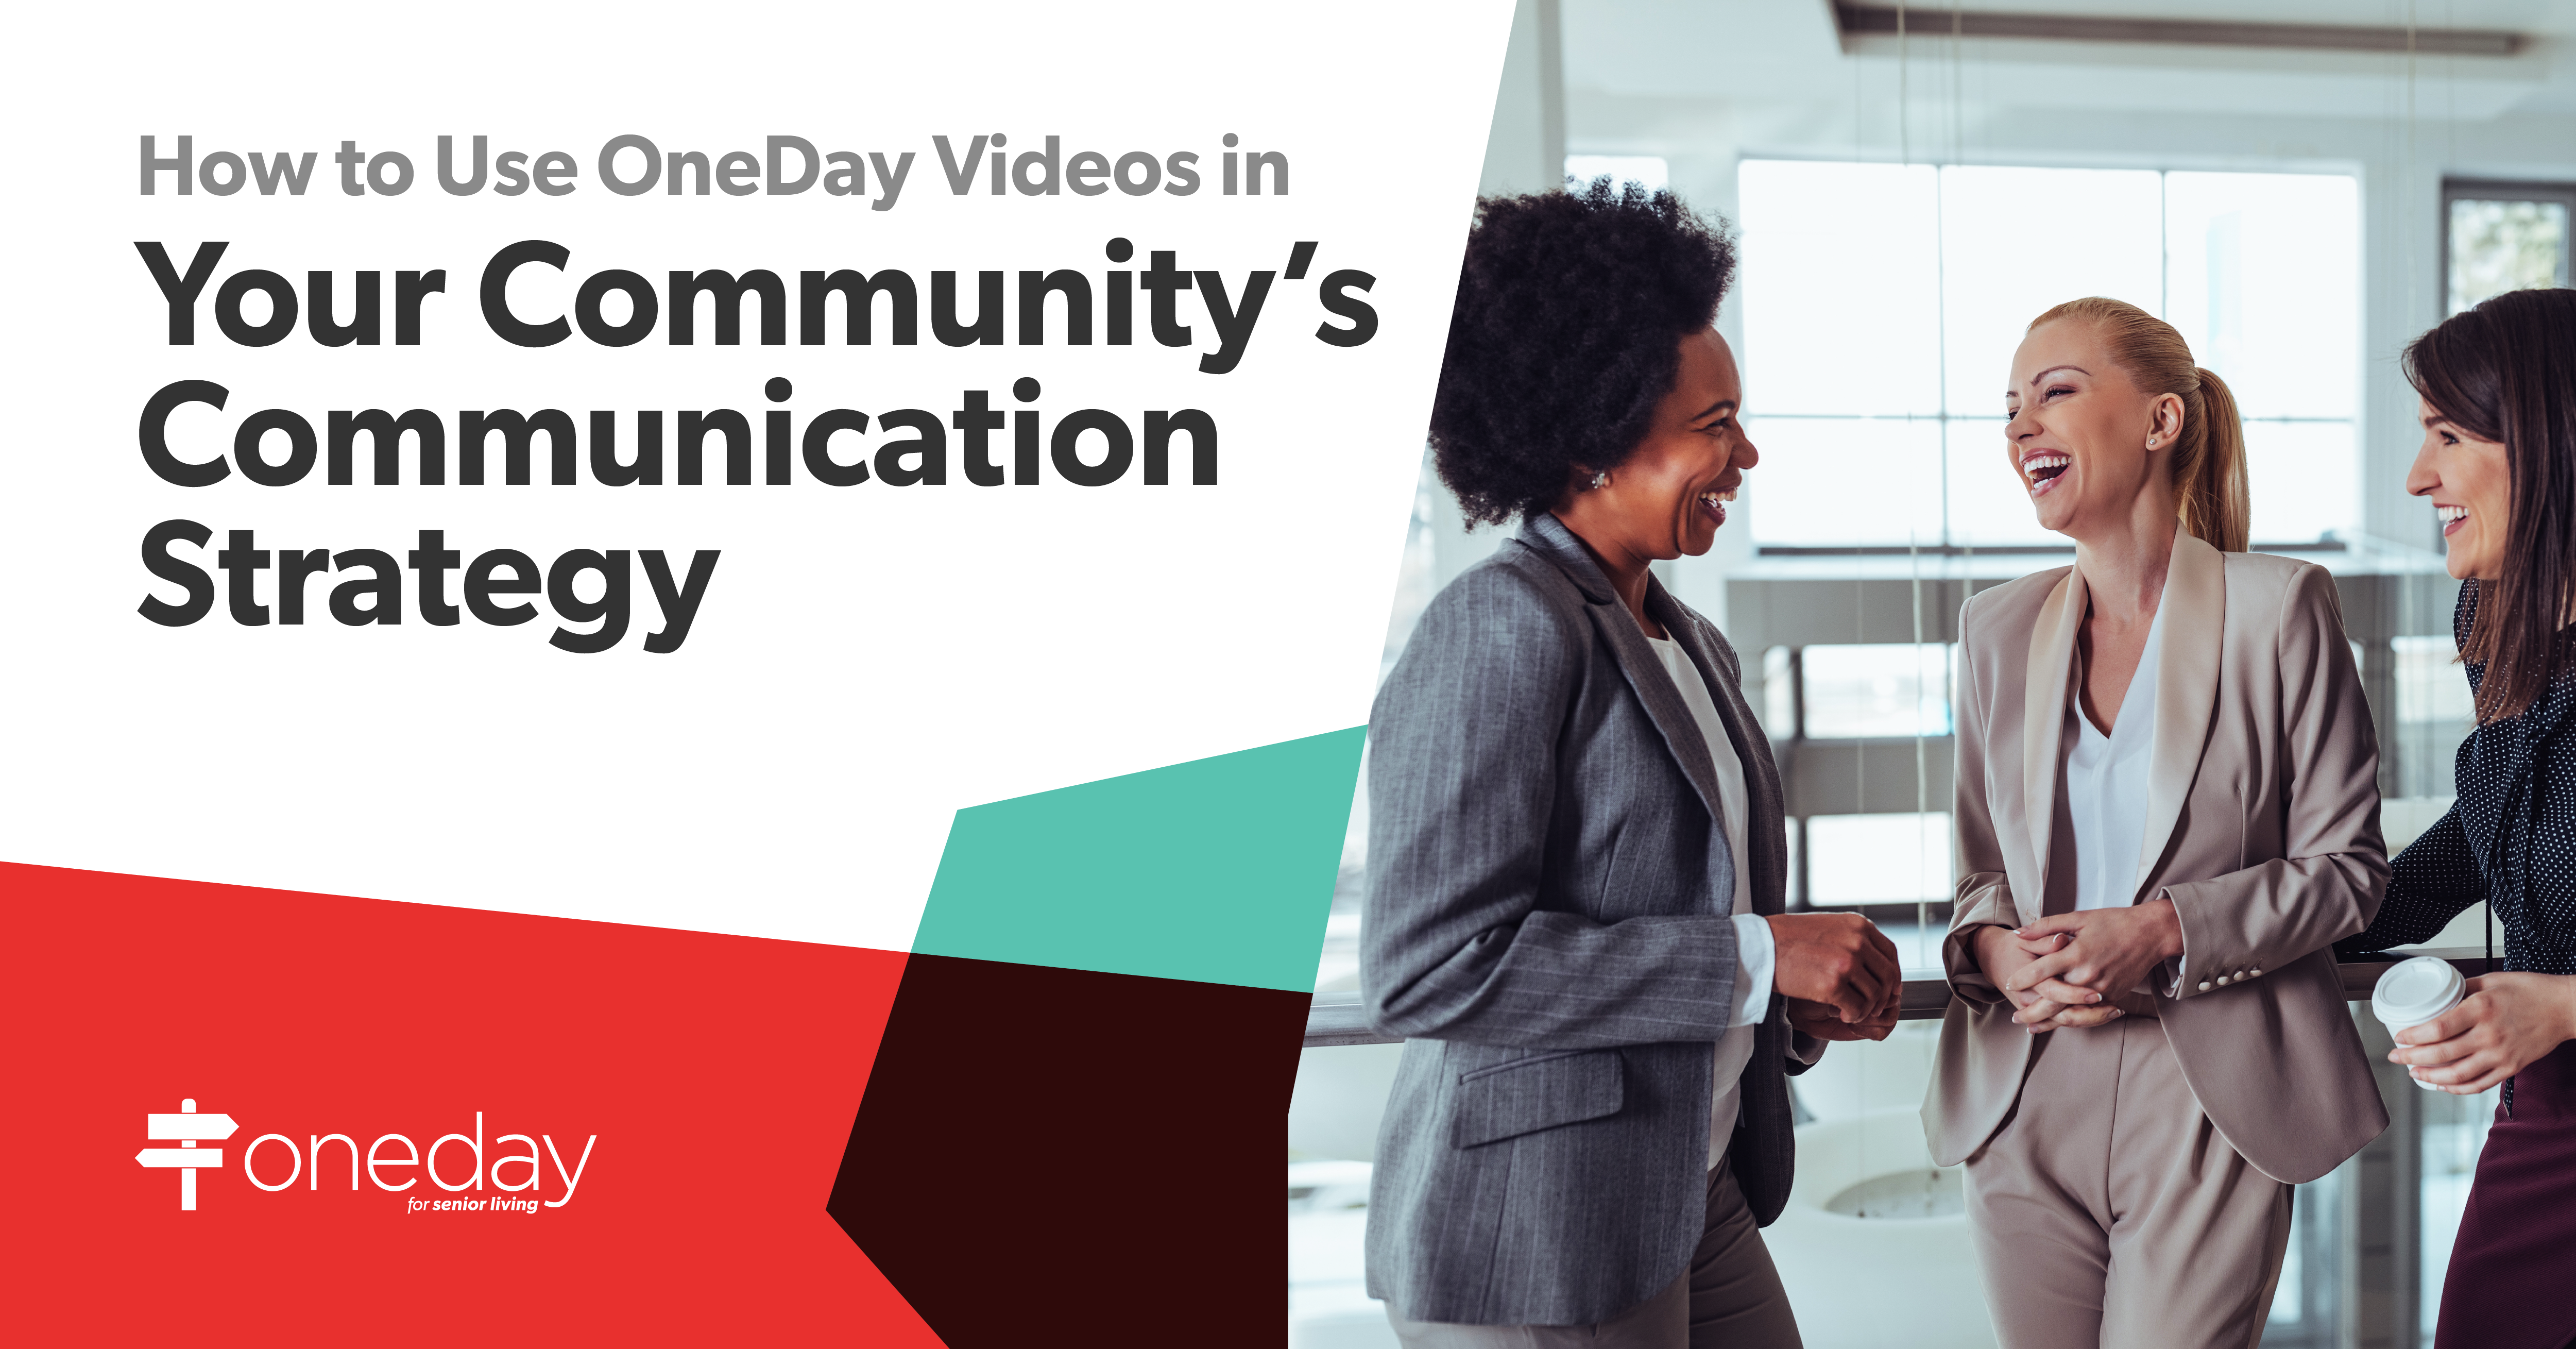 Simple best practices that senior living communities can use to improve both their external and internal communication strategies with OneDay videos.